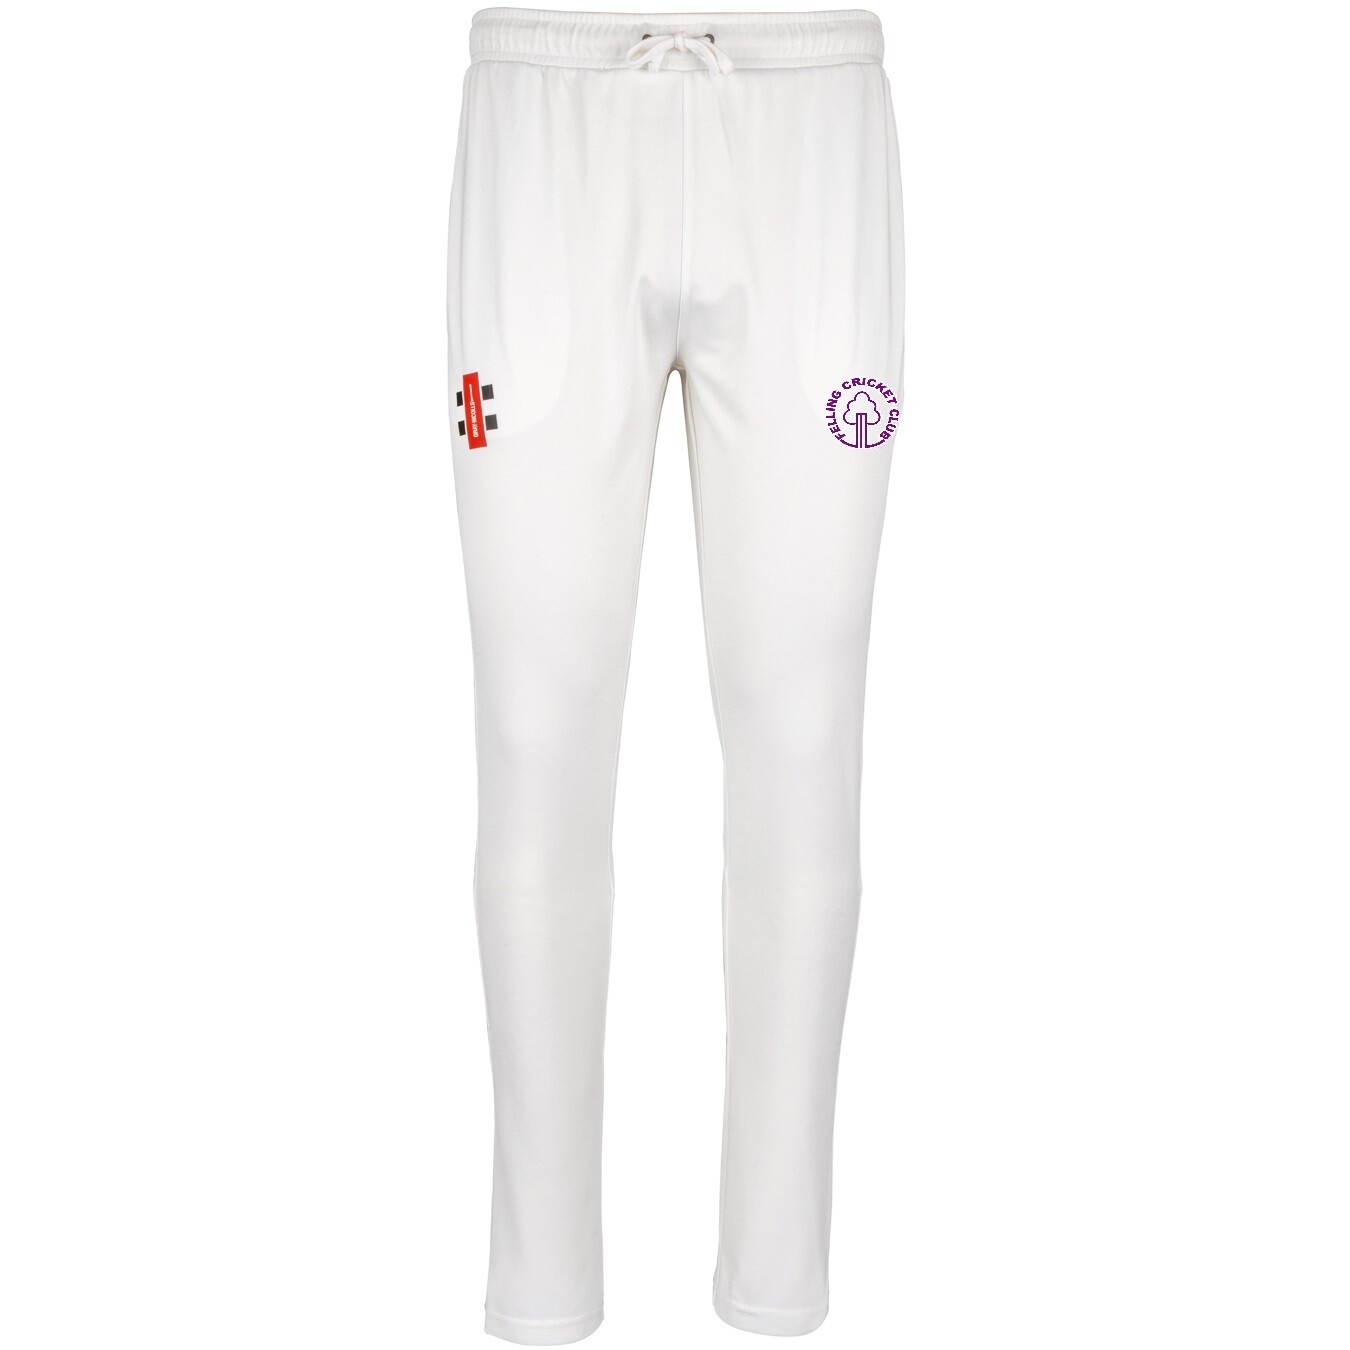 Felling Pro Performance Cricket Trousers